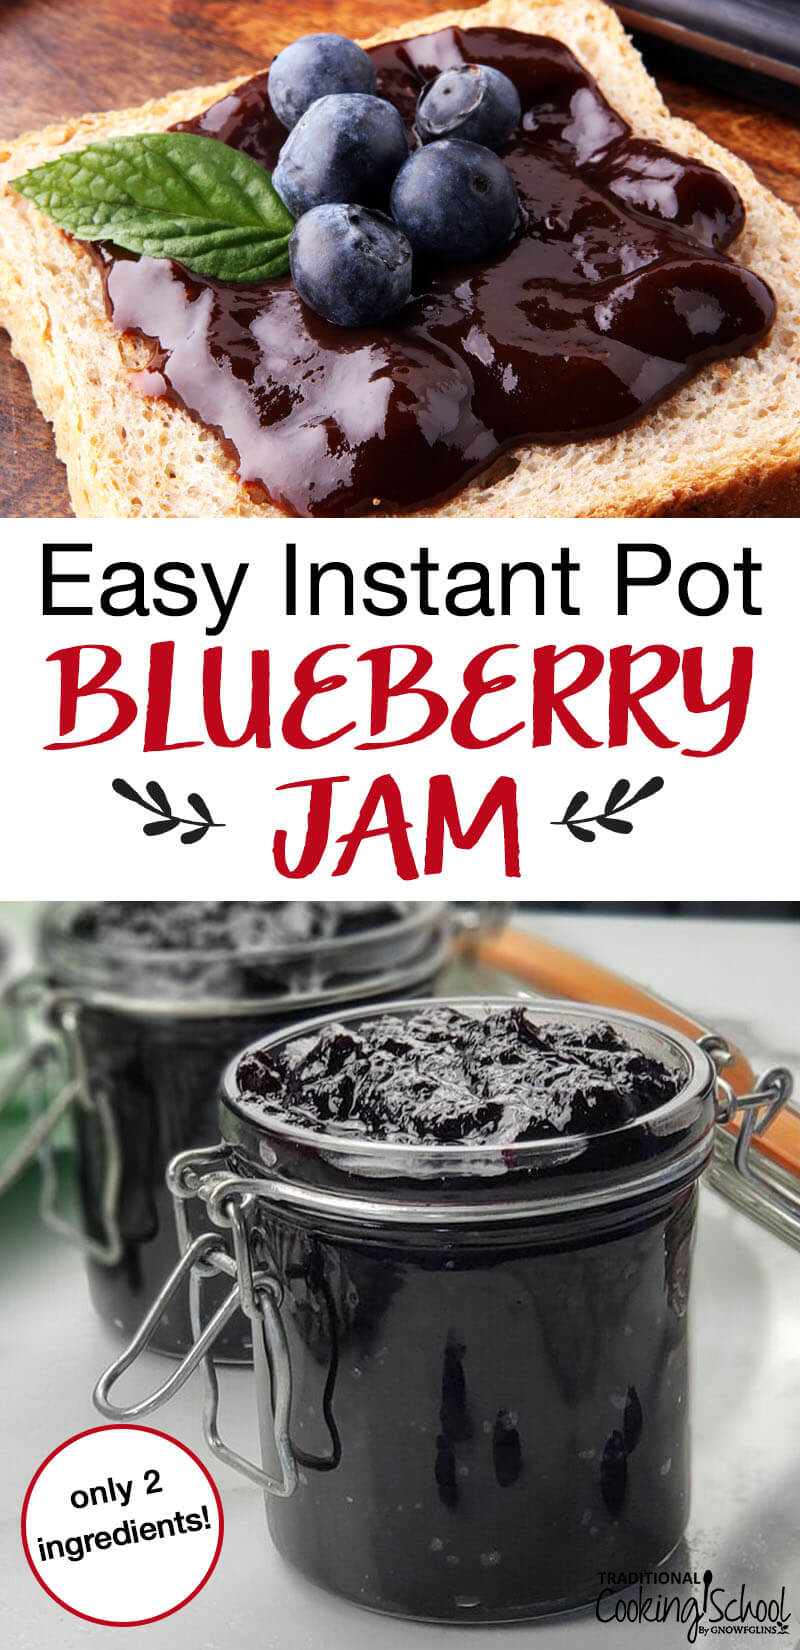 Toast with blueberry jam and a jar of blueberry jam with text overlay